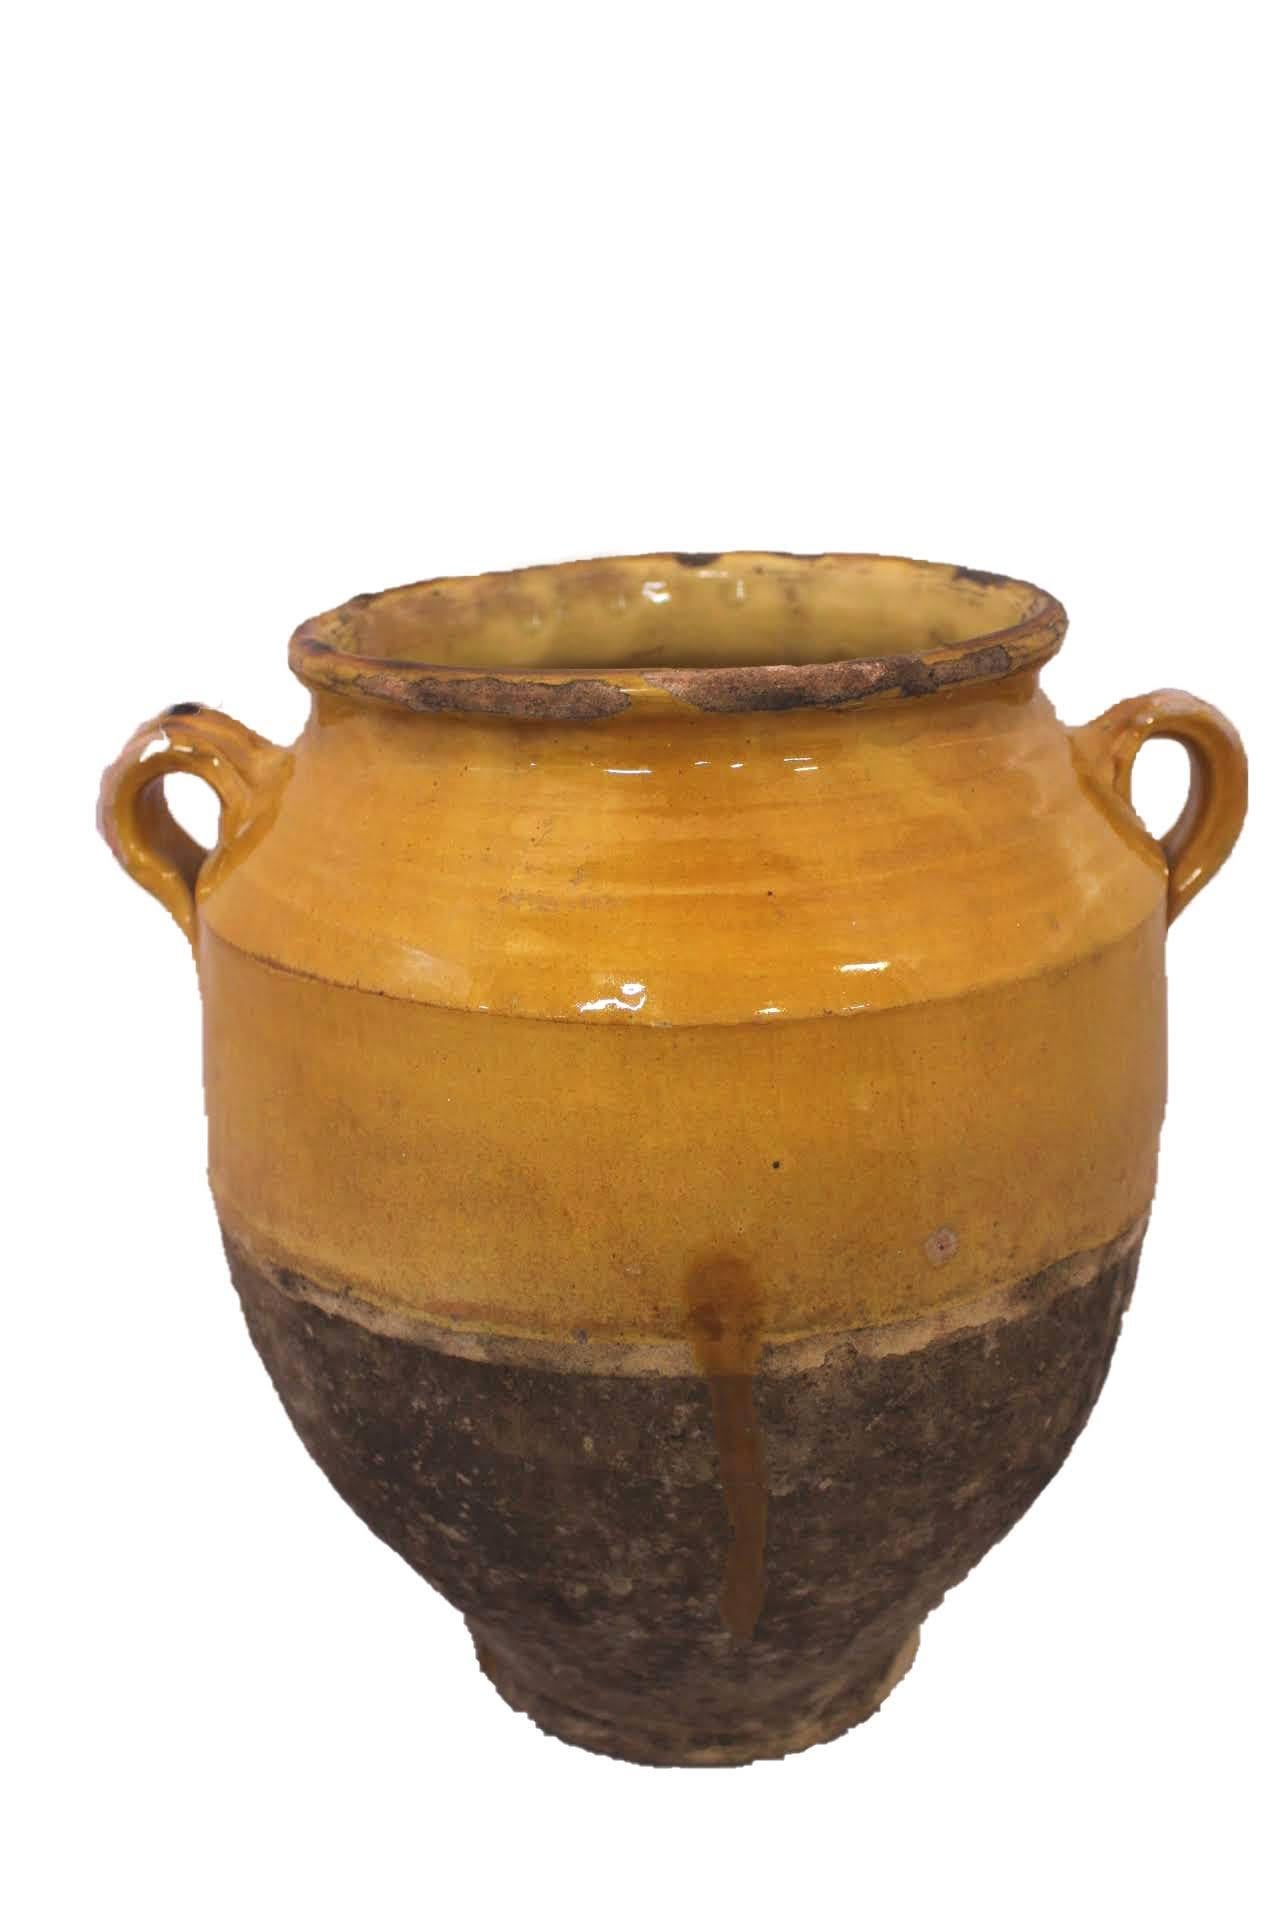 French terracotta confit pot
Traditional large earthenware pottery confit pot from South West France with yellow glaze
This vessel was used from the 19th to the mid-20th century to conserve food
Very decorative
Good patina and bright yellow